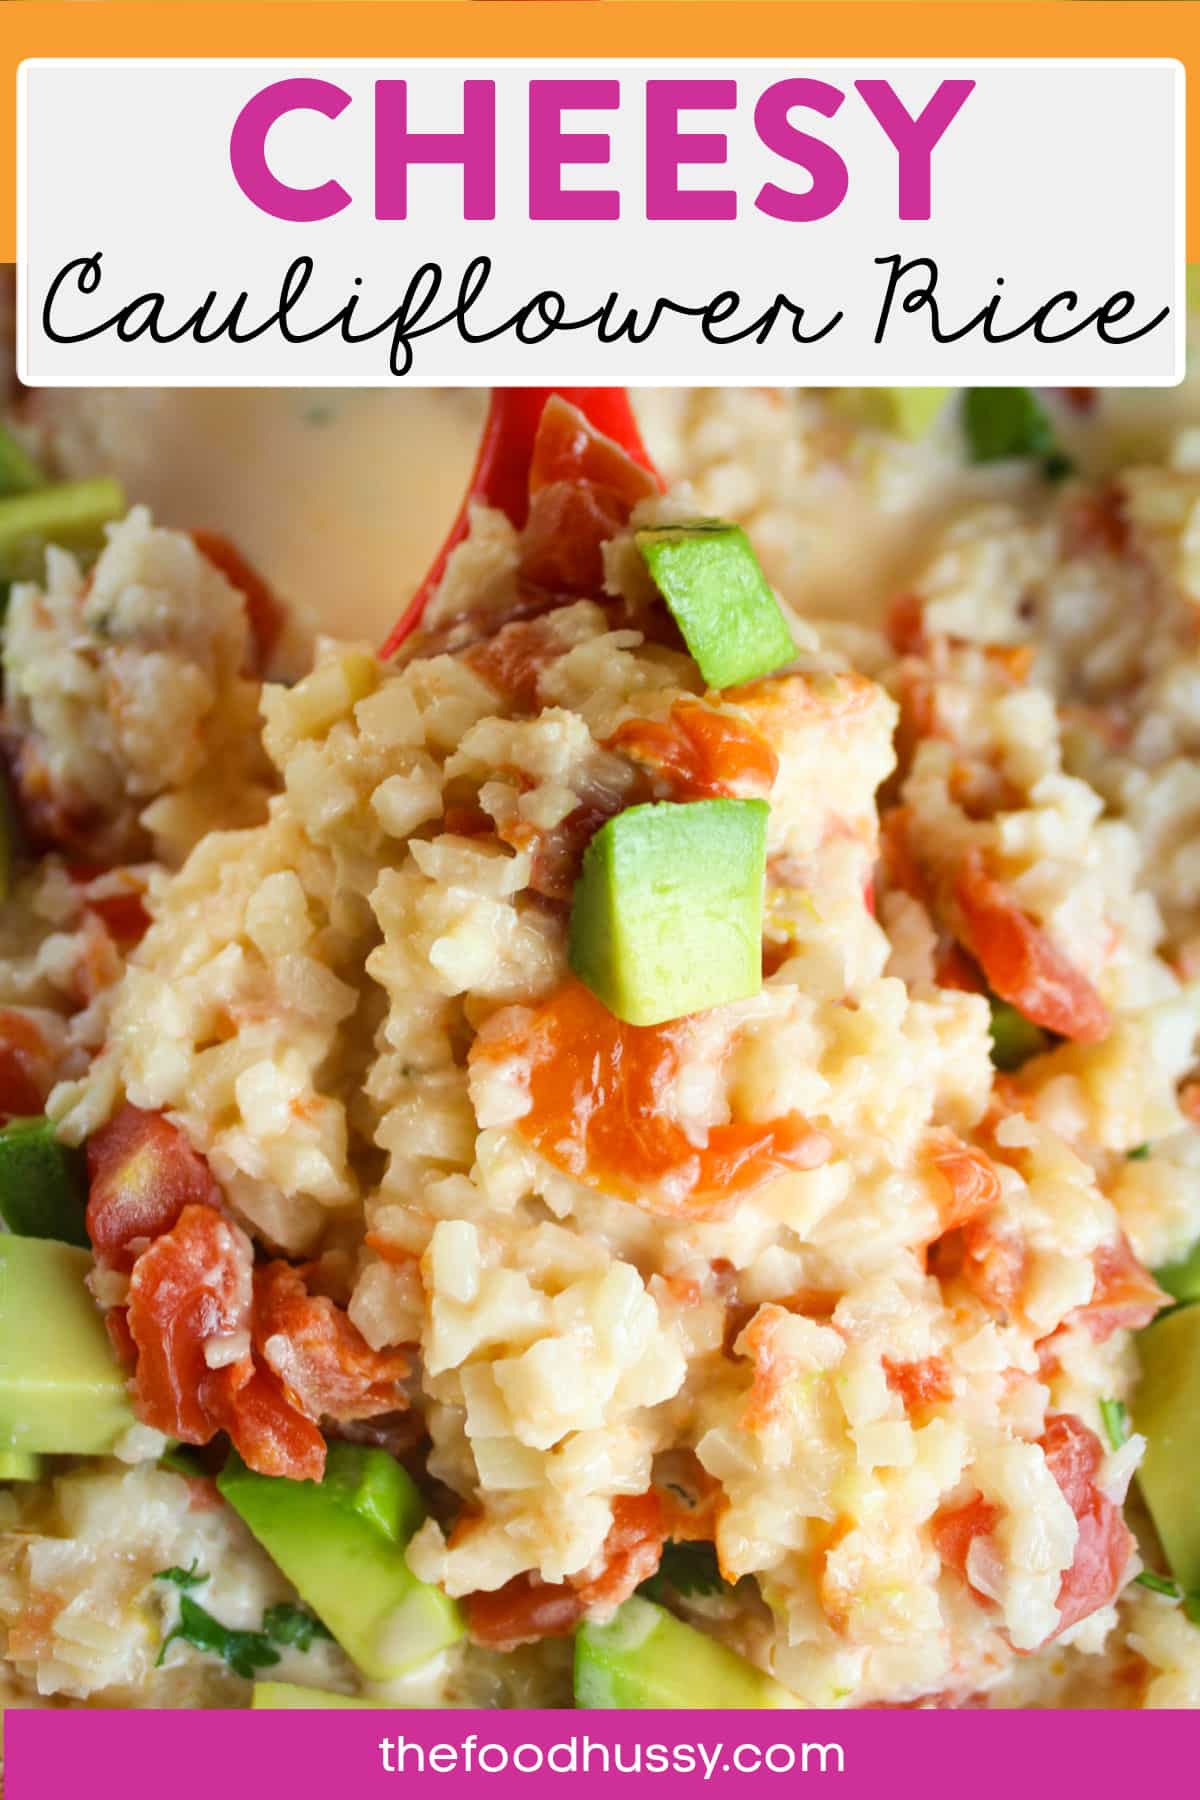 This Cheesy Cauliflower Rice is my absolute new favorite side dish! It's cheesy, creamy and full of veggies. I promise if you make this keto-friendly dish once - you'll be making it every week! via @foodhussy